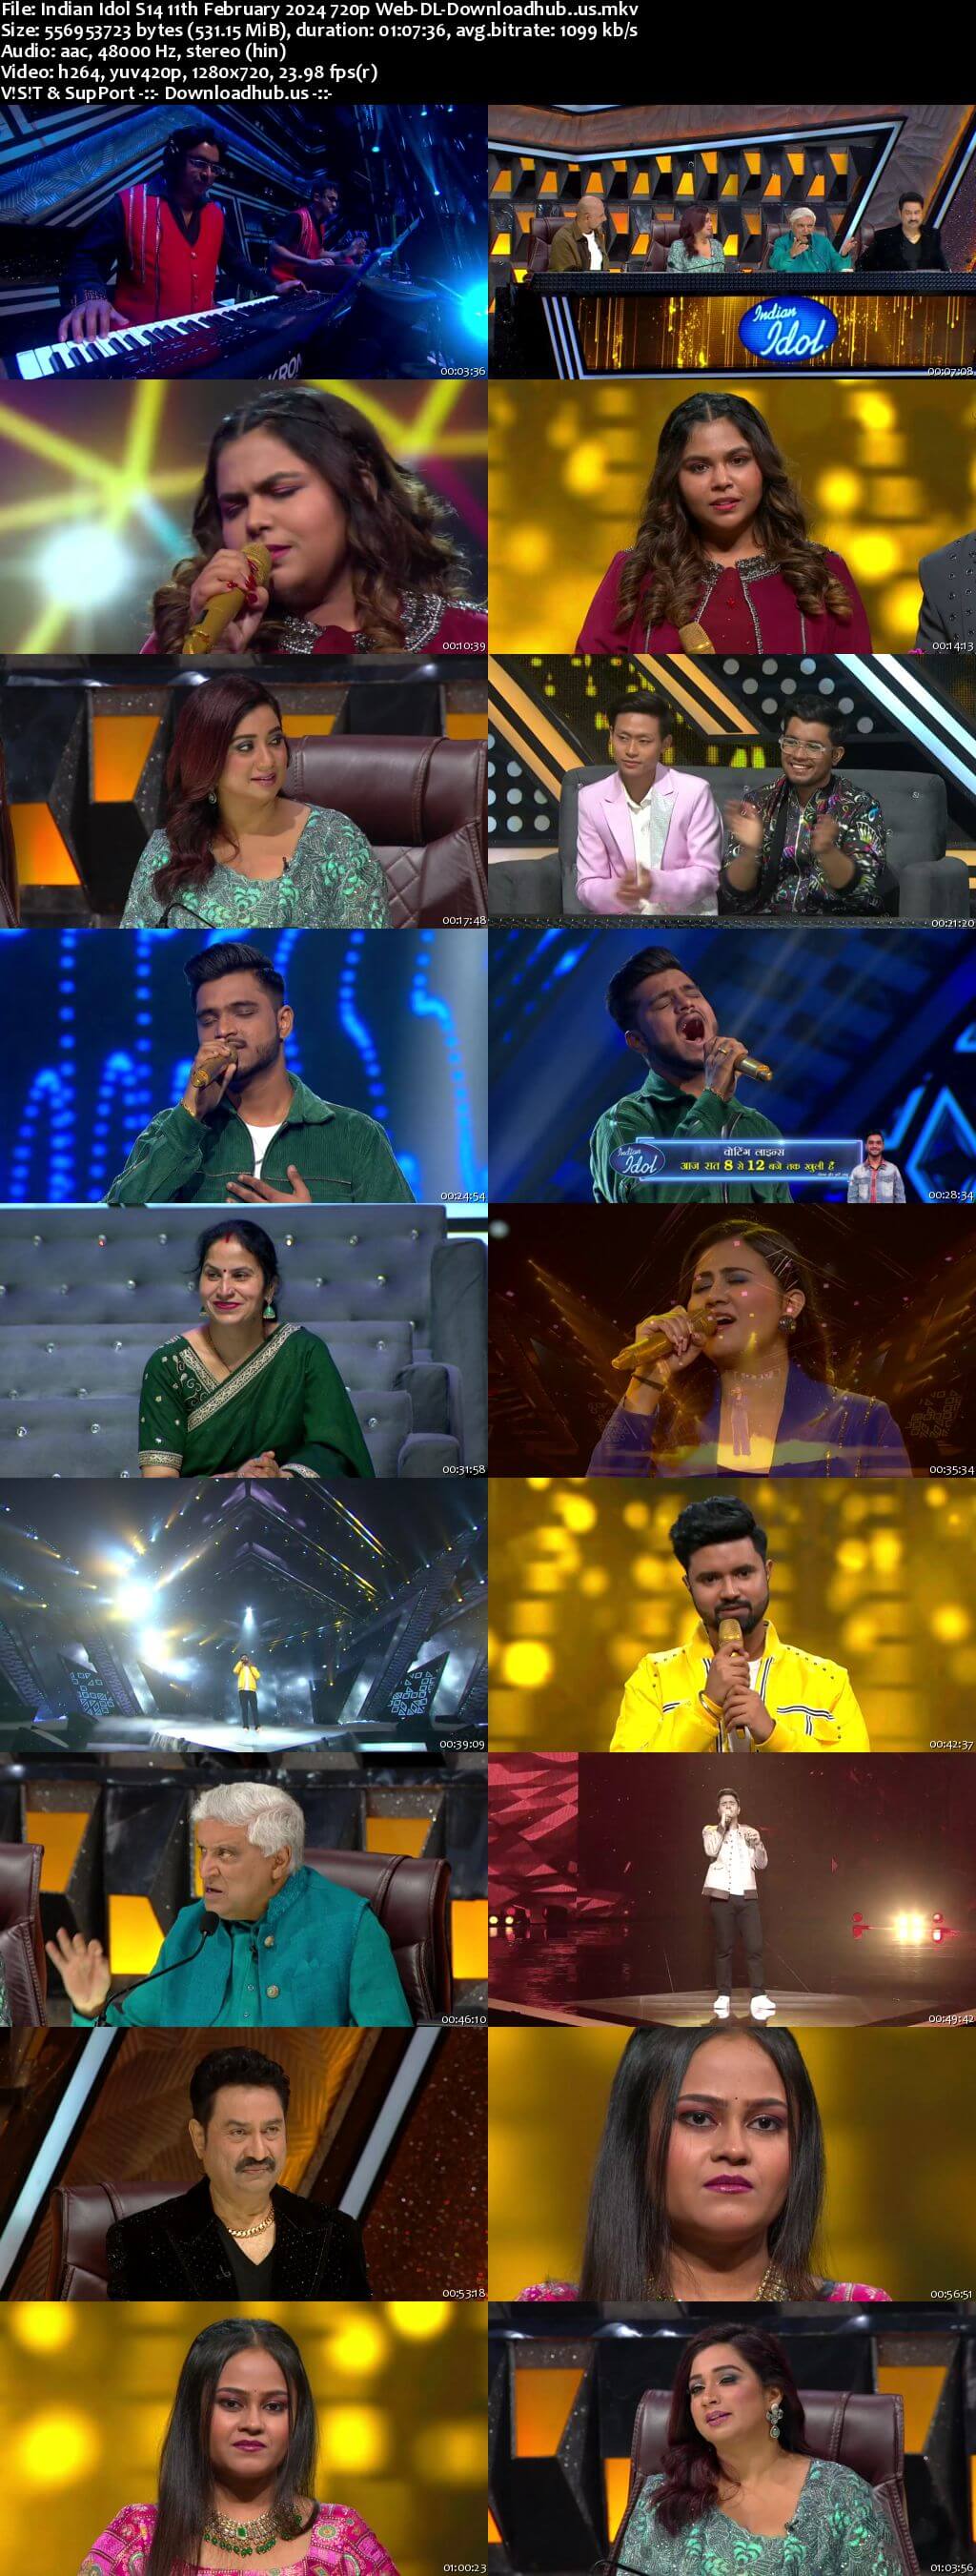 Indian Idol S14 11 February 2024 Episode 38 Web-DL 720p 480p